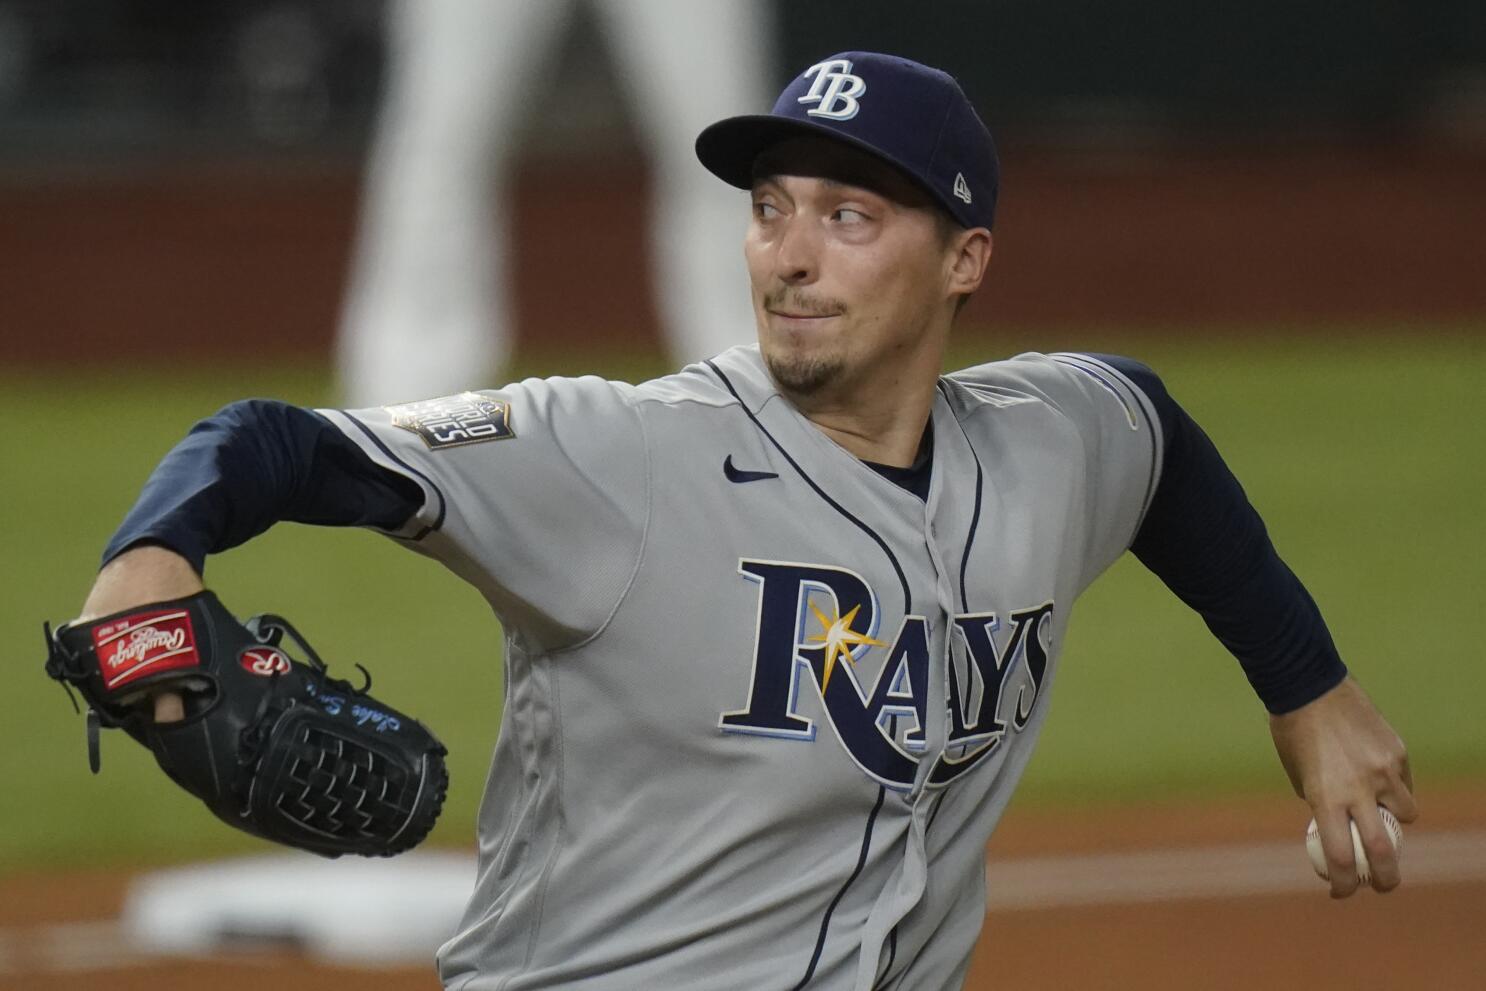 Padres News: Friars set to acquire Rays P Blake Snell - Gaslamp Ball